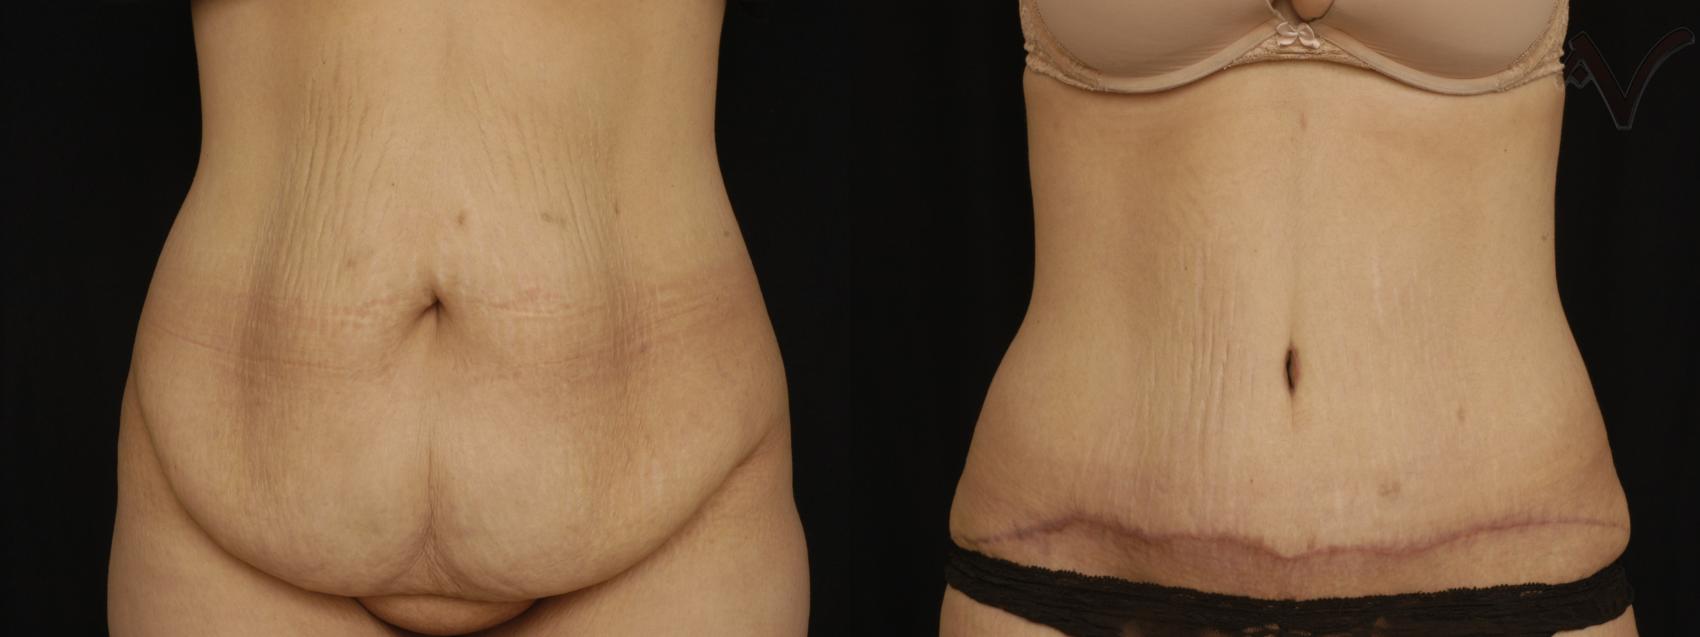 Before & After Abdominoplasty after Massive Weight Loss Case 59 Front View in Los Angeles, CA